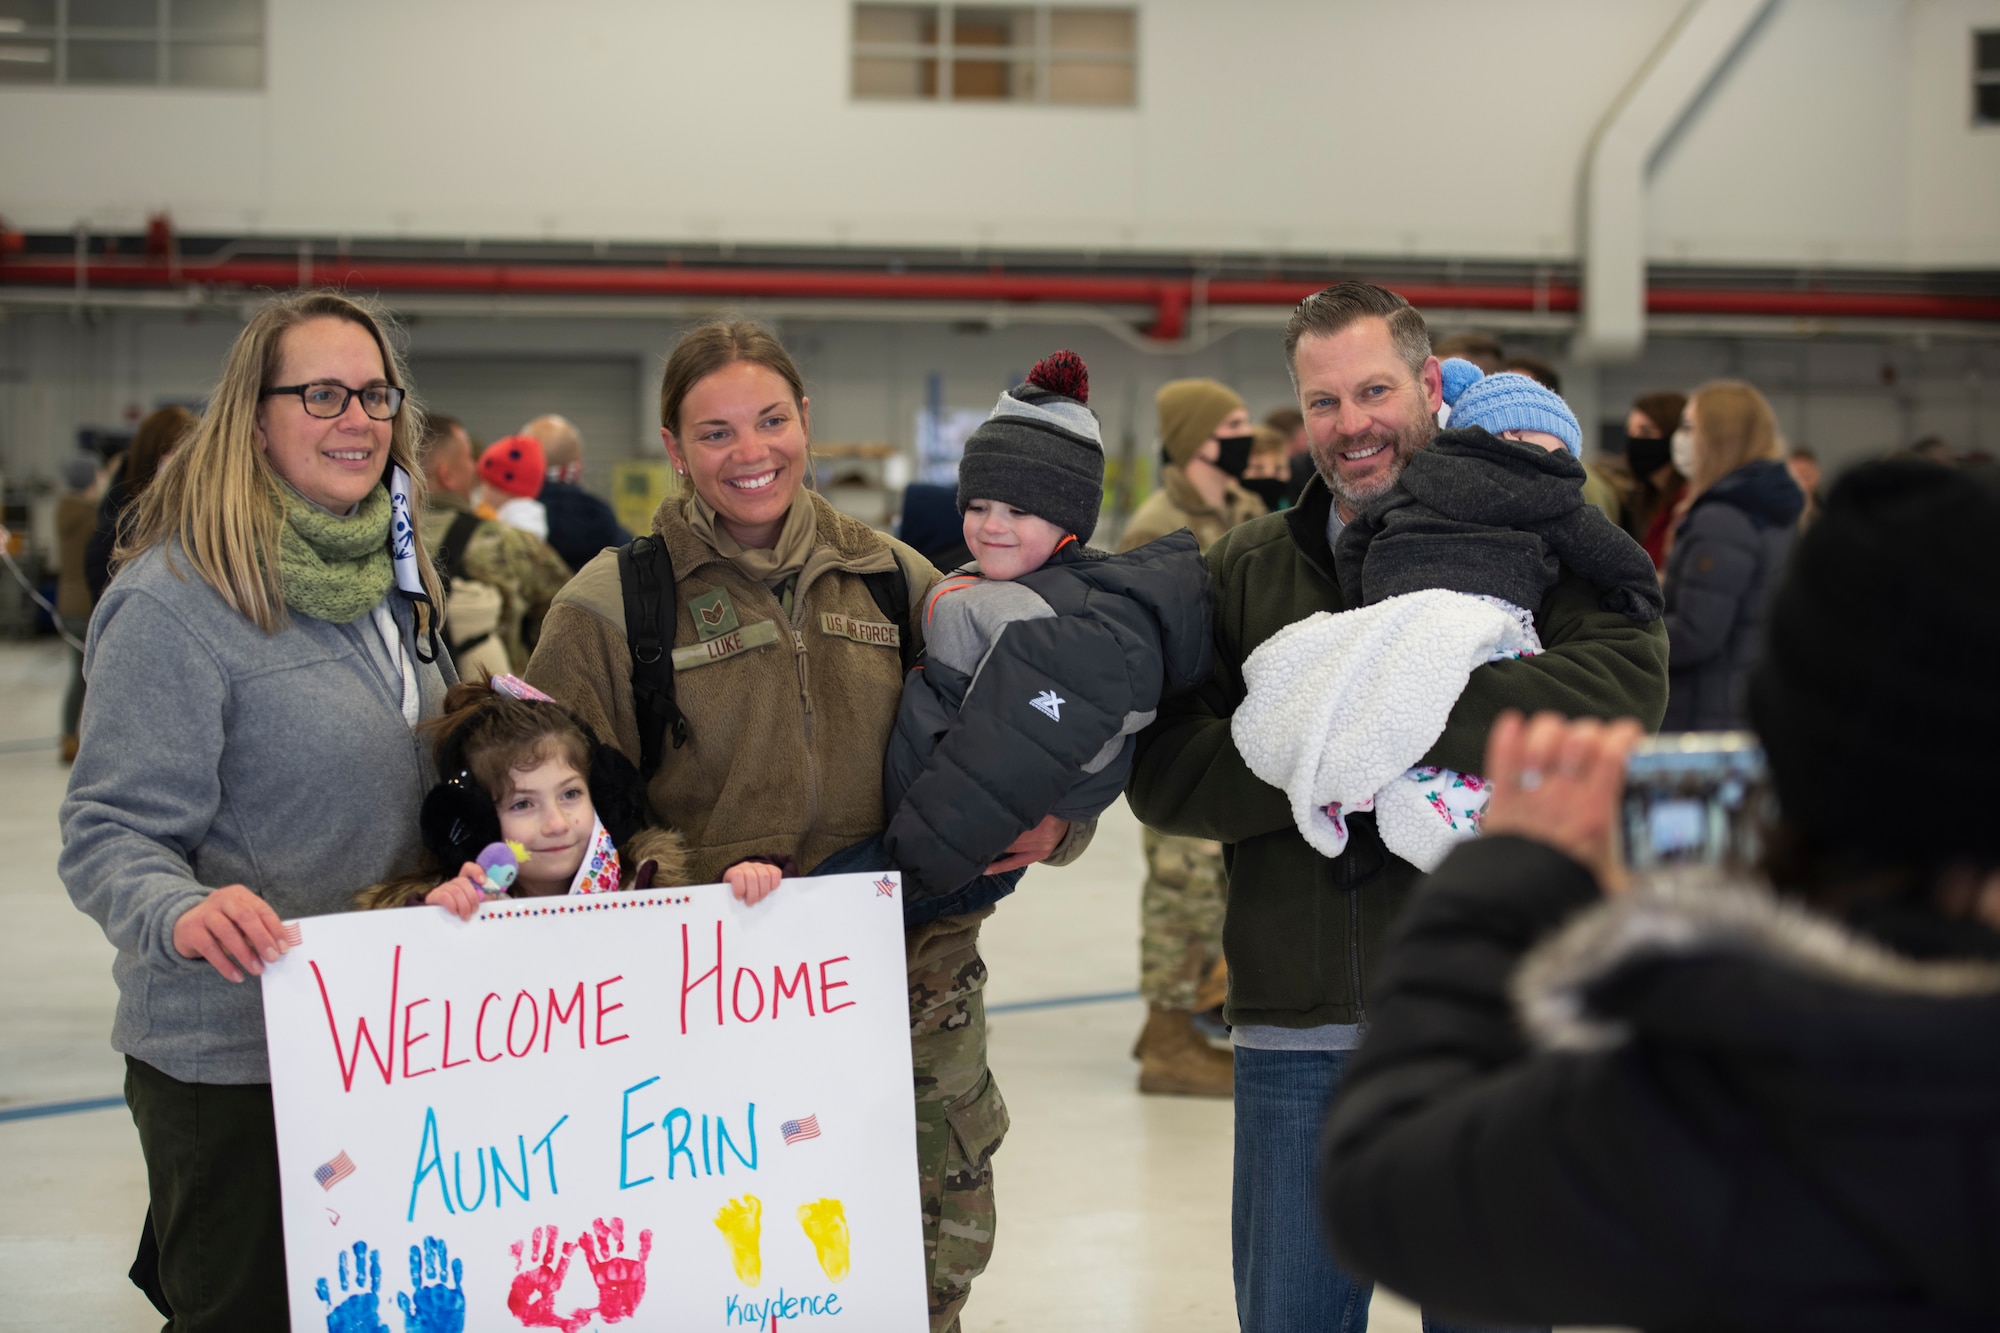 Staff Sgt. Erin Luke, a weapons technician, assigned to the Ohio National Guard’s 180th Fighter Wing, poses for a photo with family members after being welcomed home from their overseas deployment, Jan. 26, 2020 at the 180FW in Swanton, Ohio.